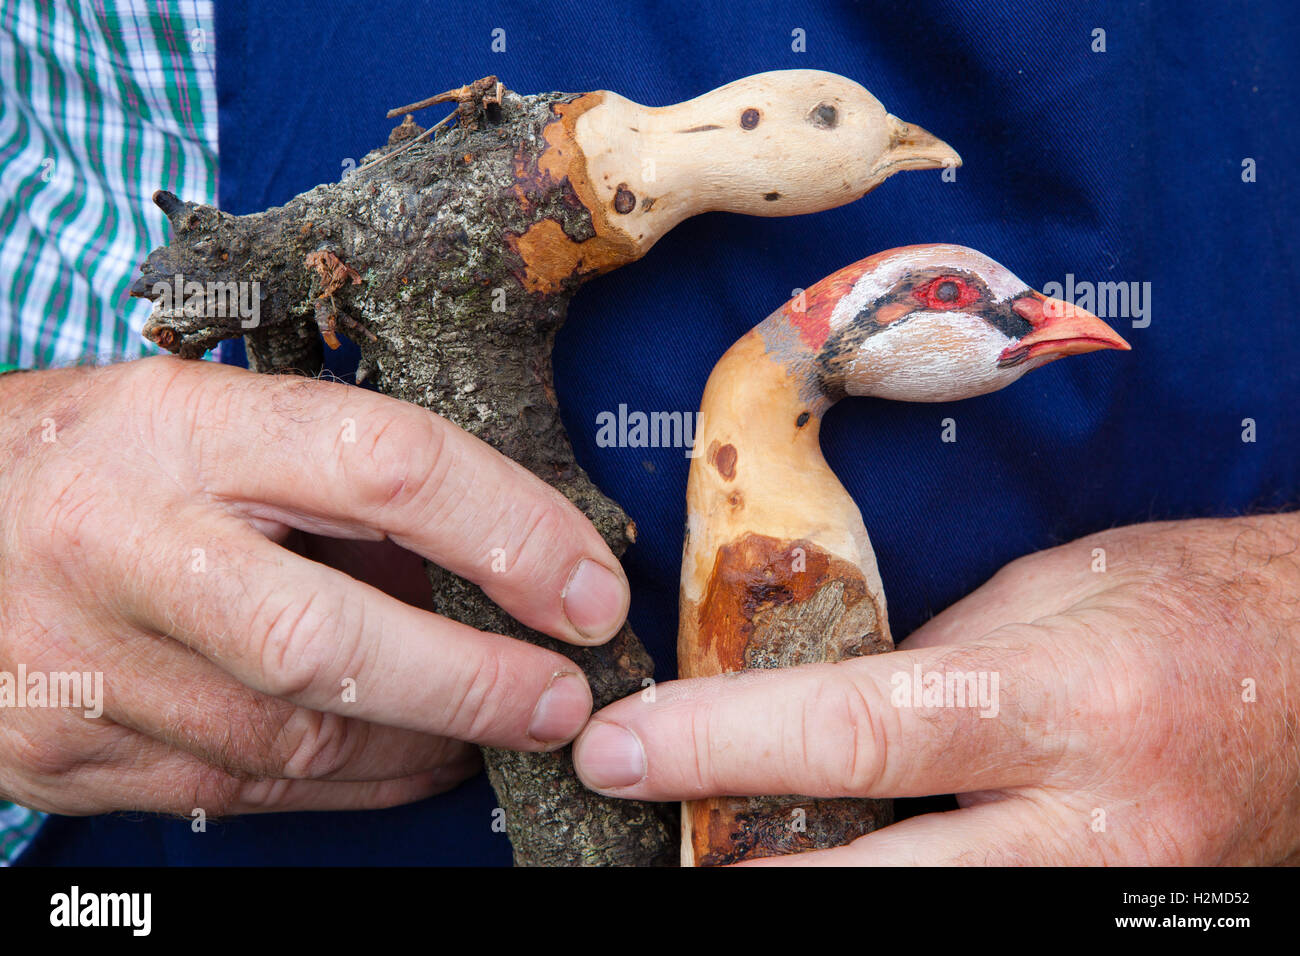 A gamne fair and a man holds carved wooden tops for canes and walking sticks made in the shape of the heads of birds and wild animals from the country. Stock Photo